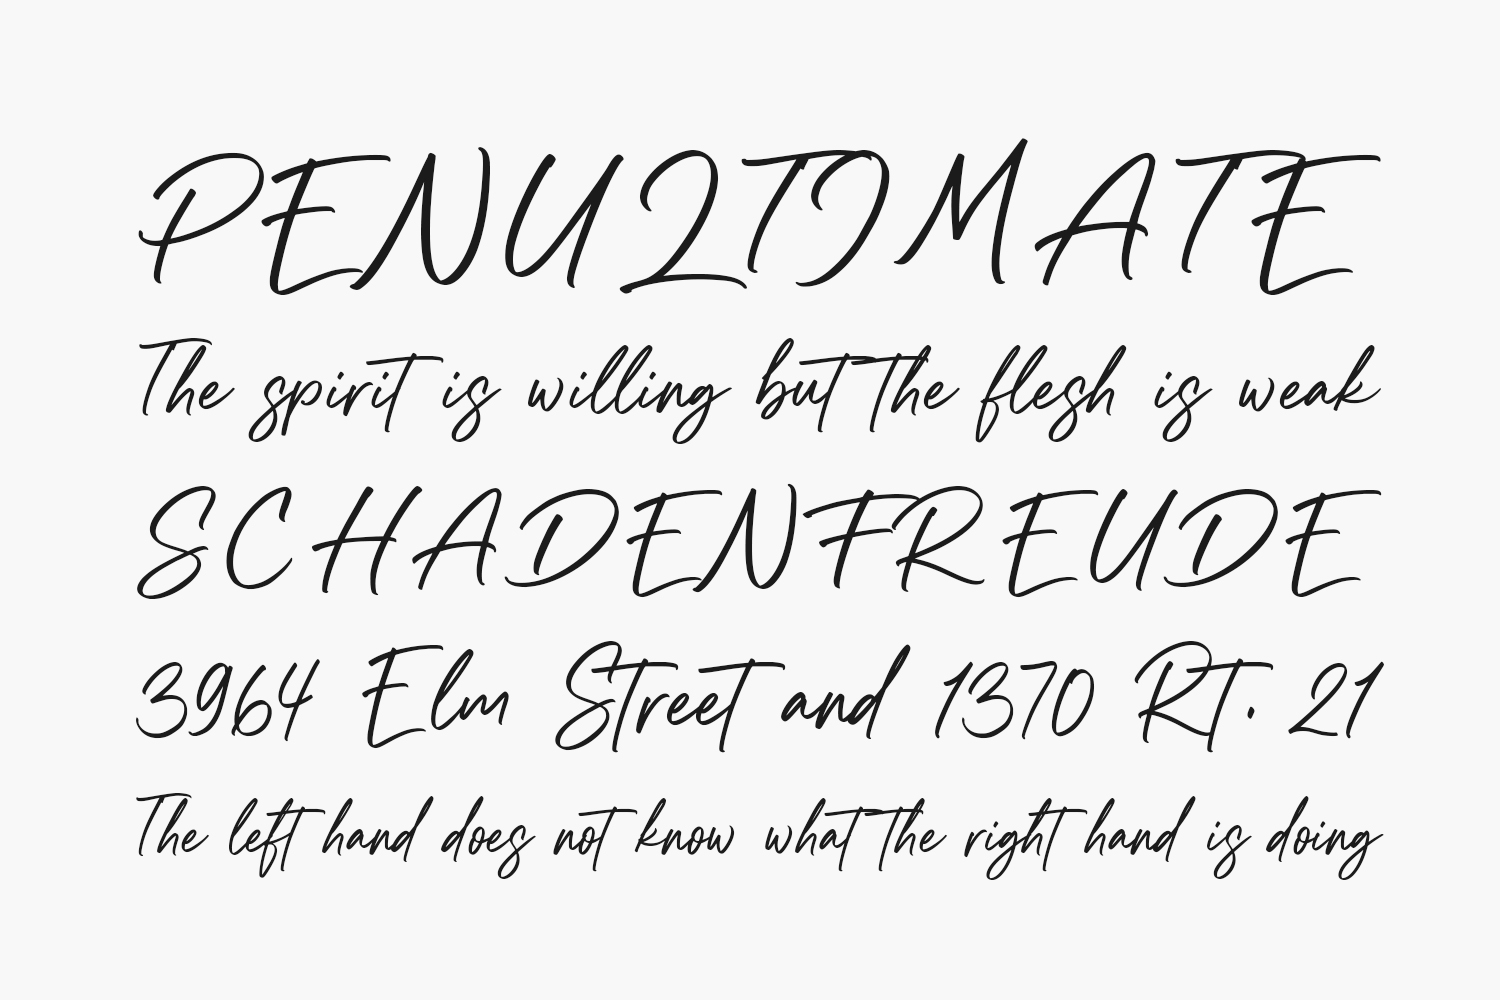 Southland Letter Free Font